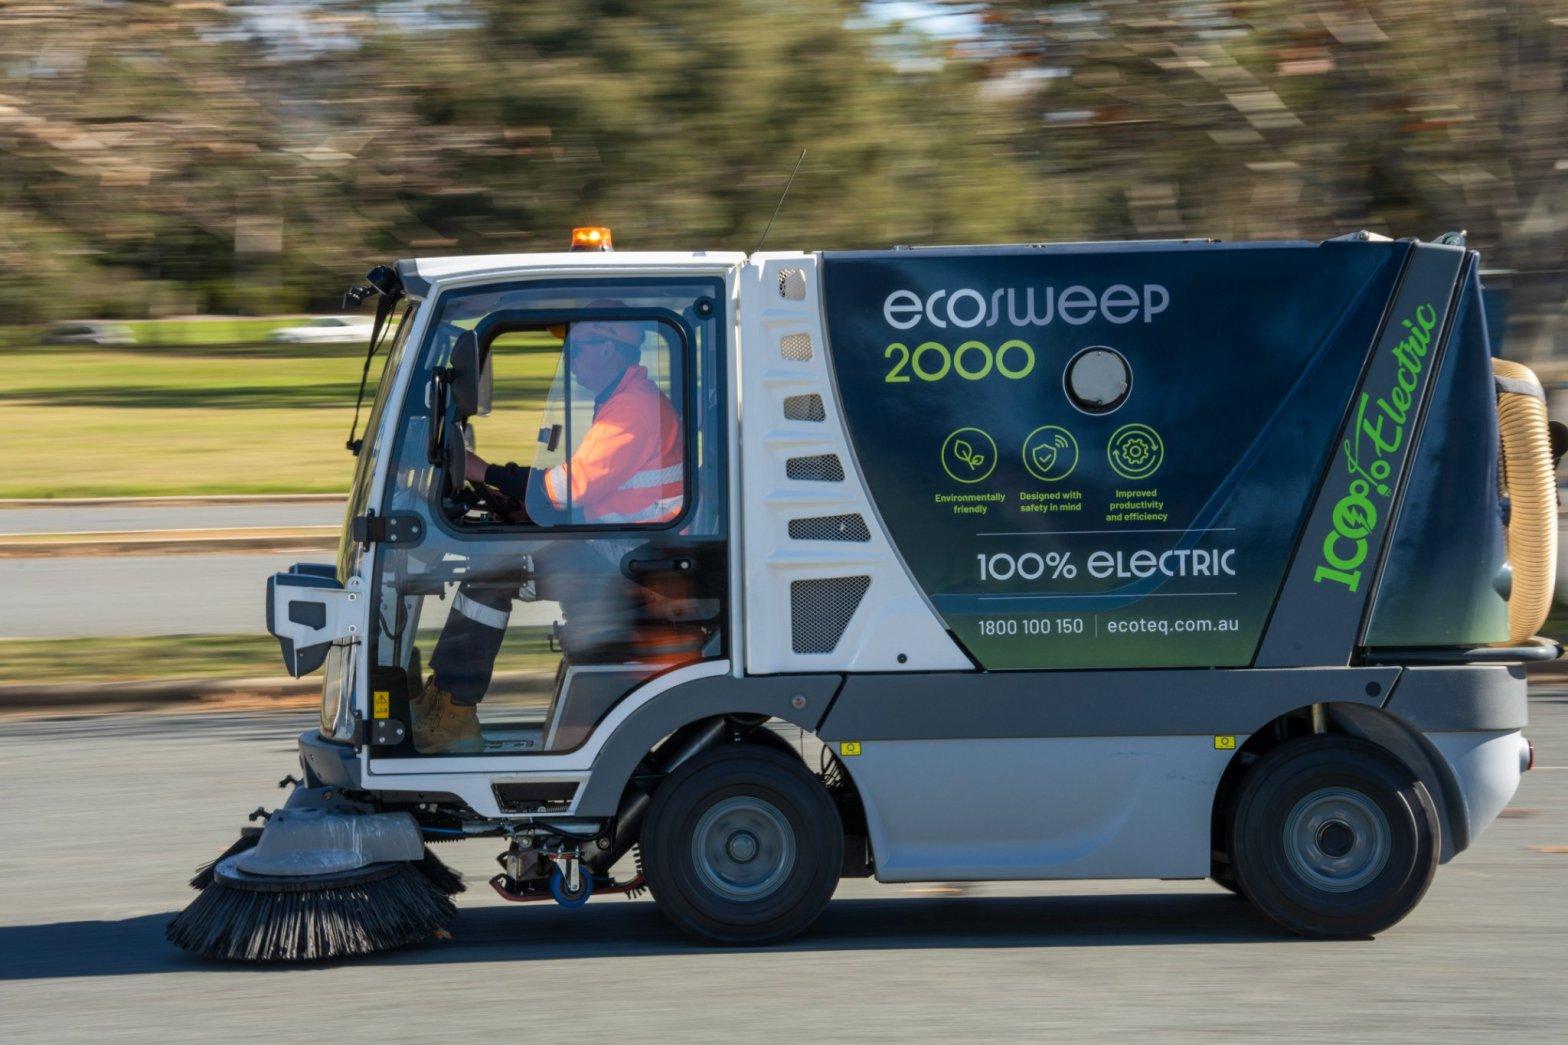 The Eco Sweeper is a fully electric street sweeper that can run continuously for 10 hours and has a 2000 litre waste capacity